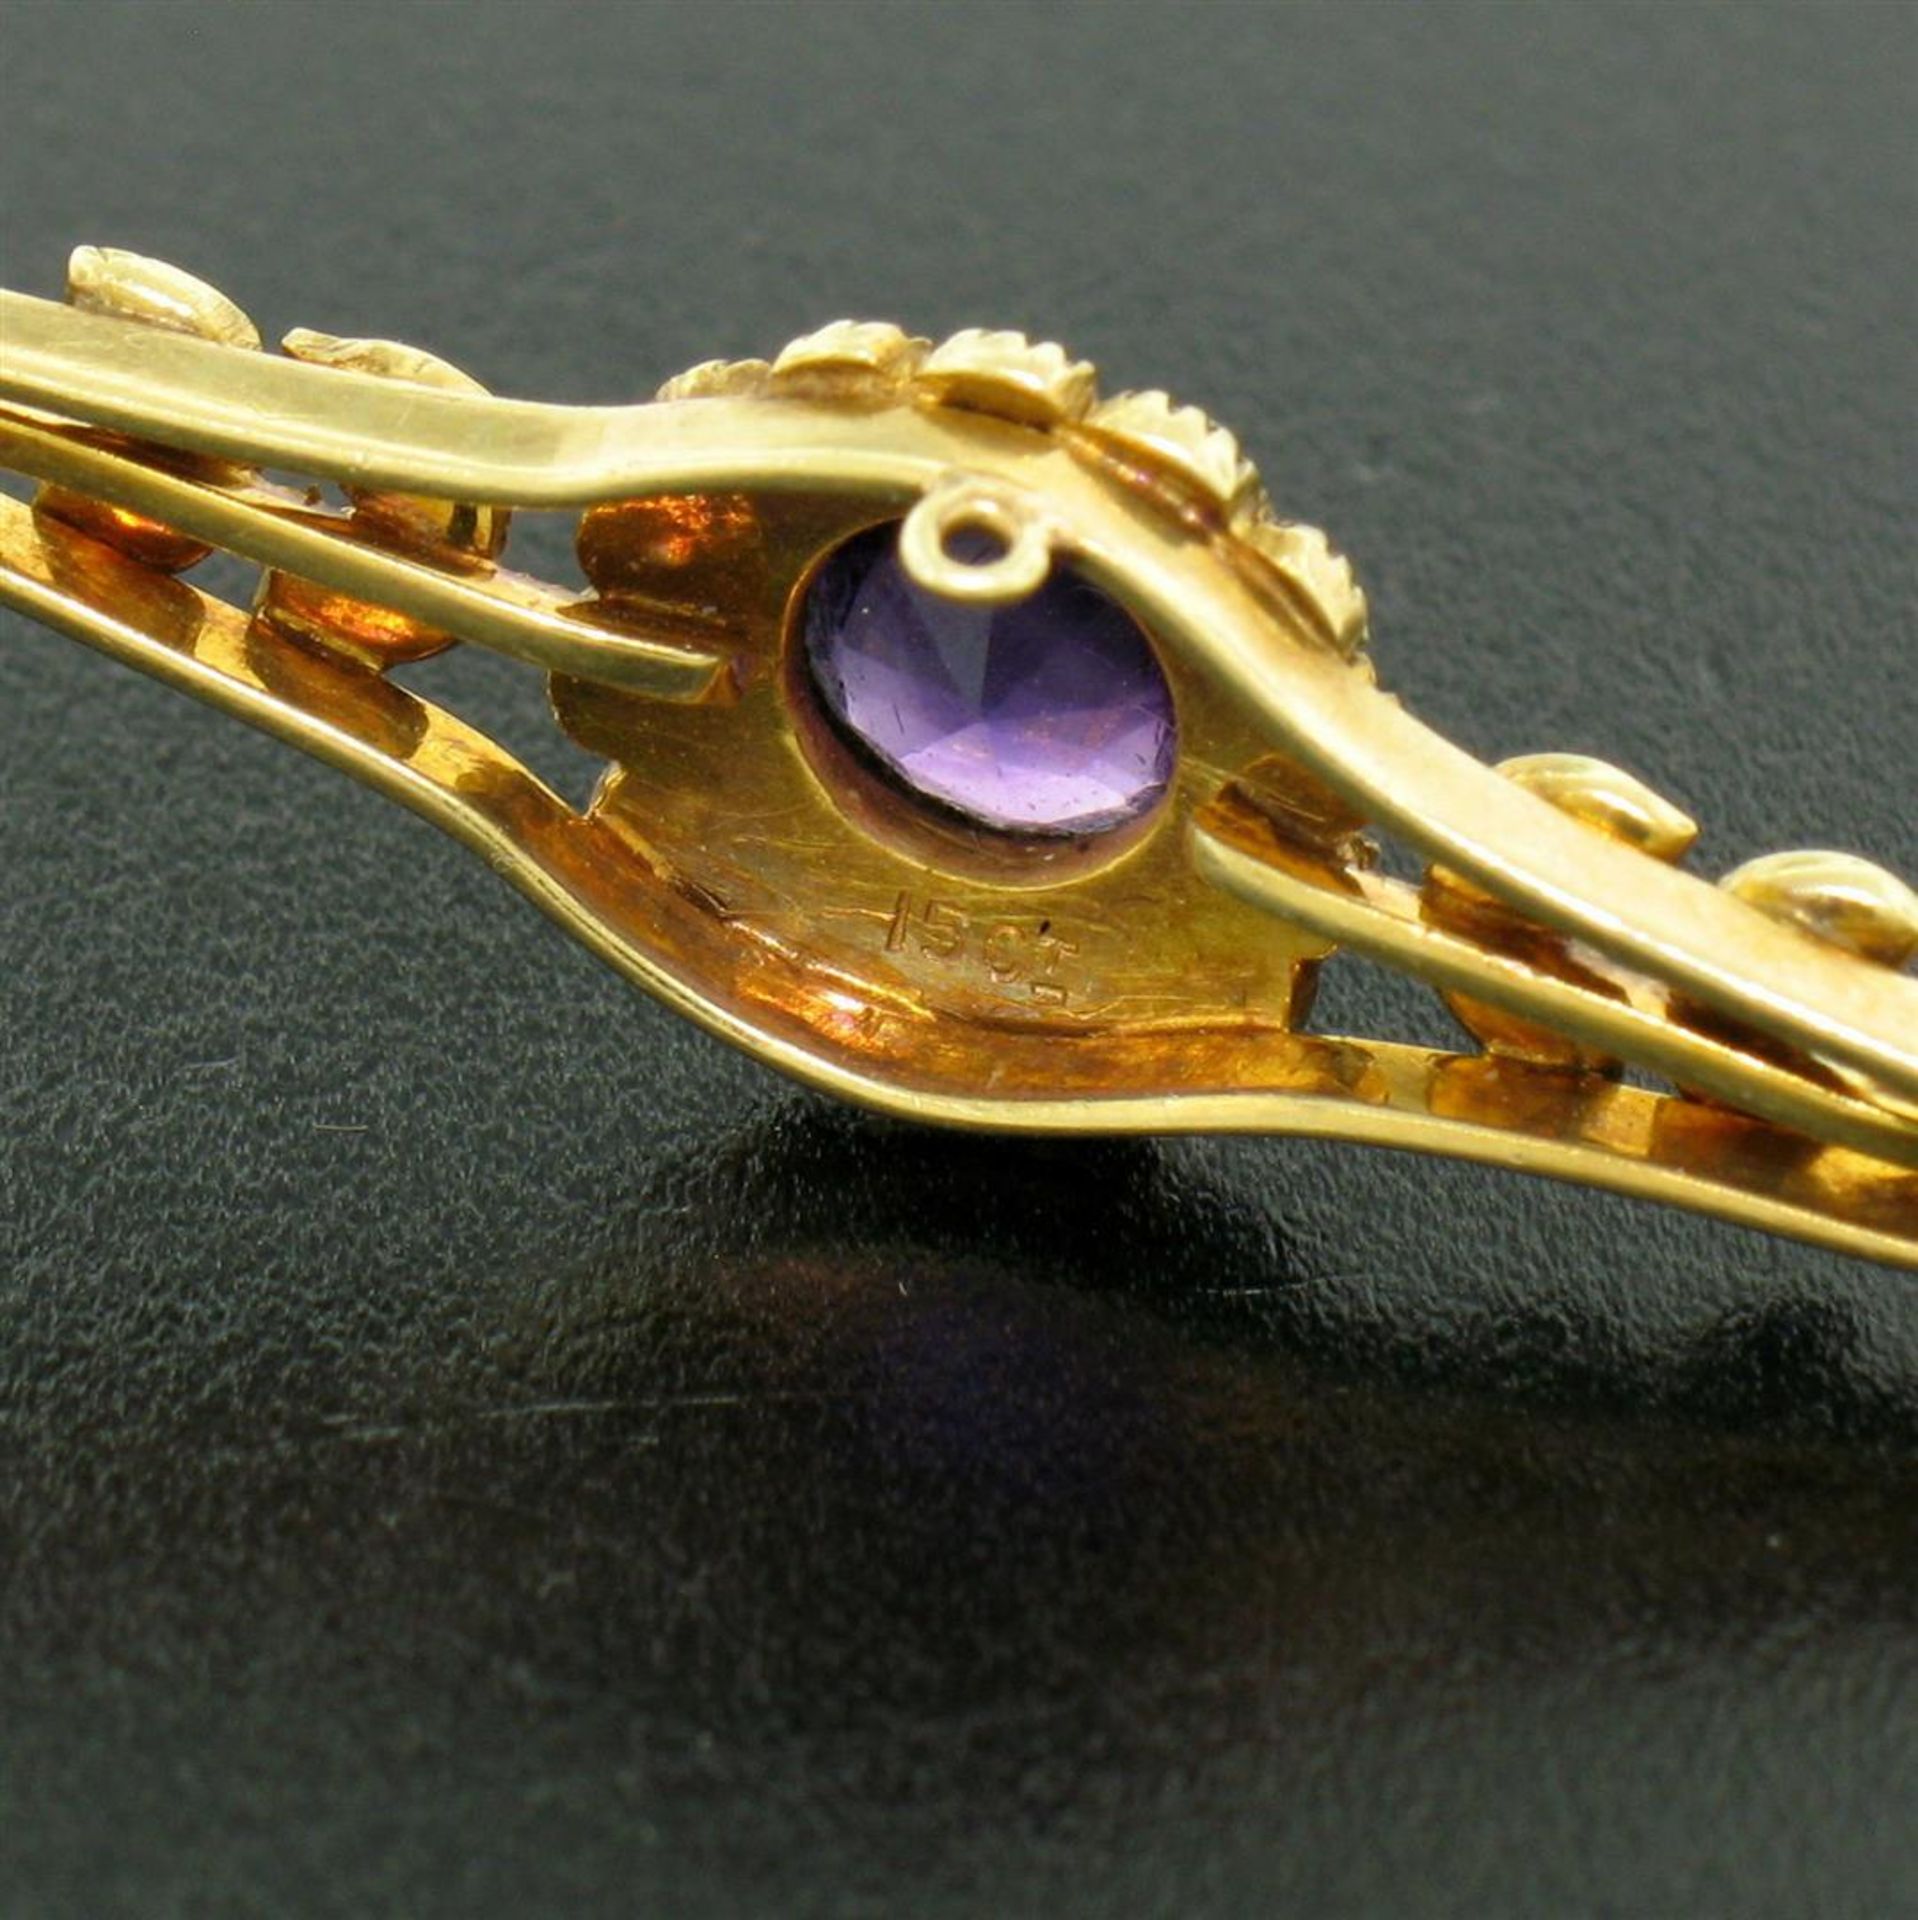 15k Yellow Gold .64 ct Old Cut Amethyst & Seed Pearl Brooch Pin - Image 7 of 8